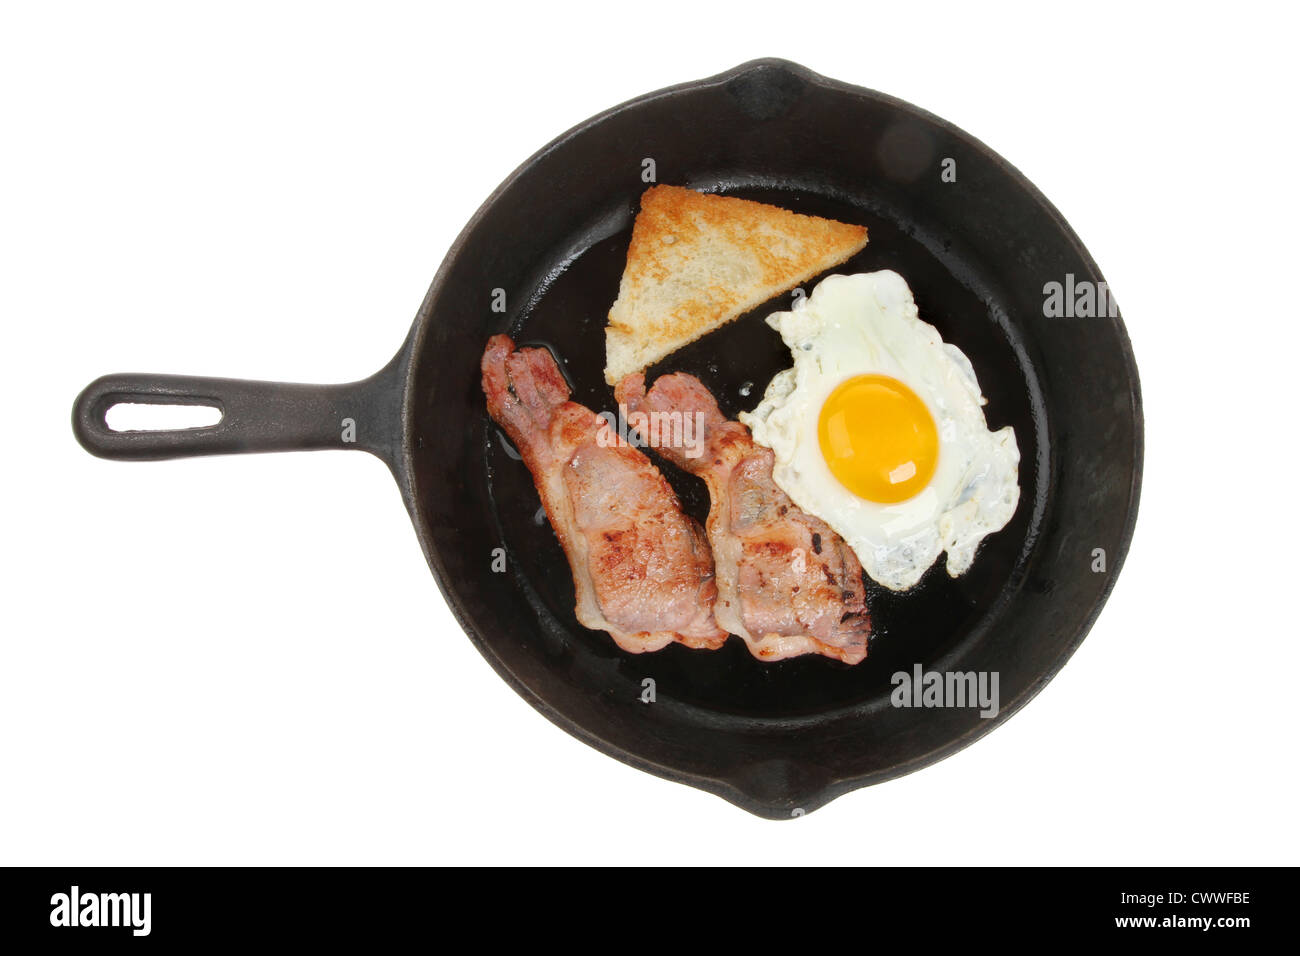 Individual fried breakfast of egg, bacon and fried bread in a pan isolated against white Stock Photo